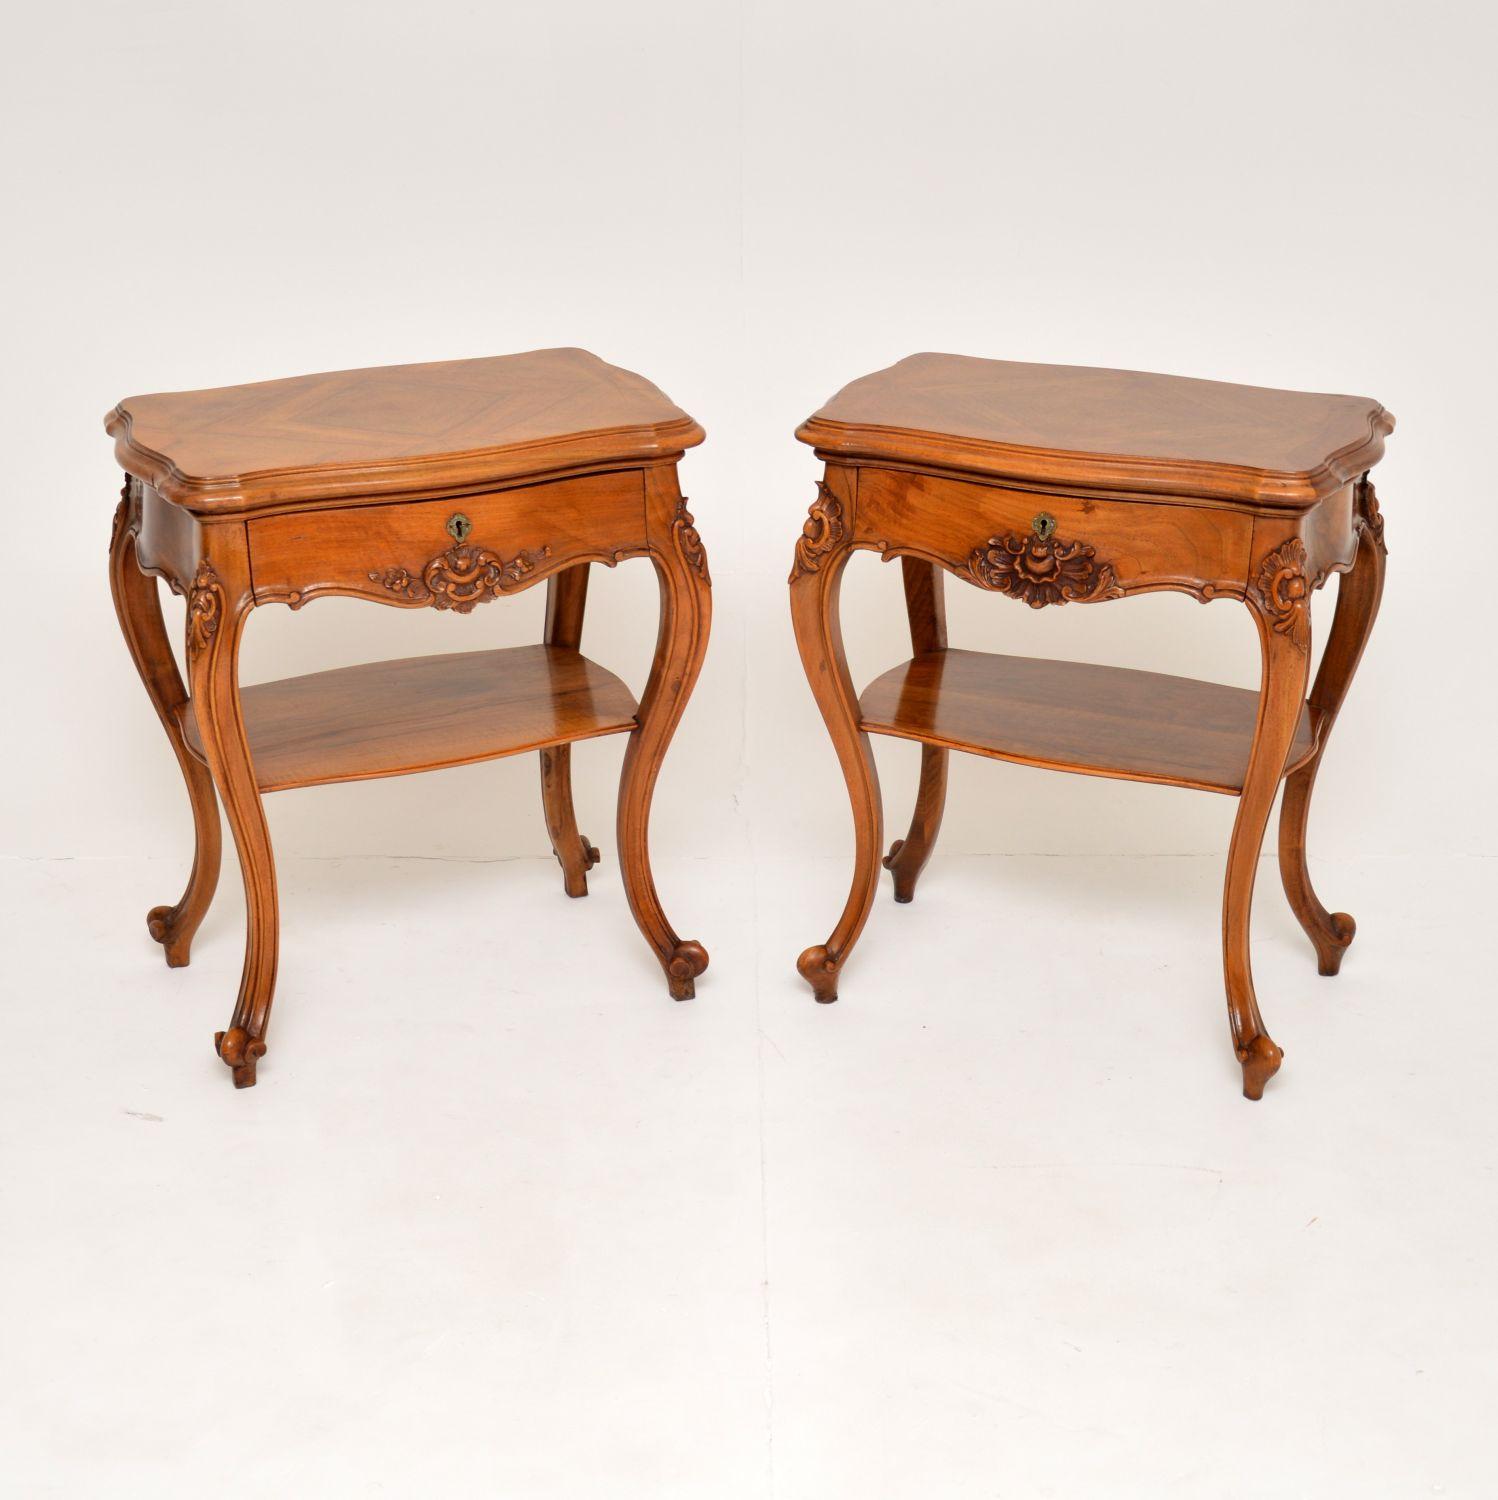 A gorgeous pair of antique French side tables in walnut, dating from around the 1890-1910 period.

The design is elegant yet sturdy, with beautifully shaped legs and serpentine shaped edges. There is lovely, intricate carving on the edges, each